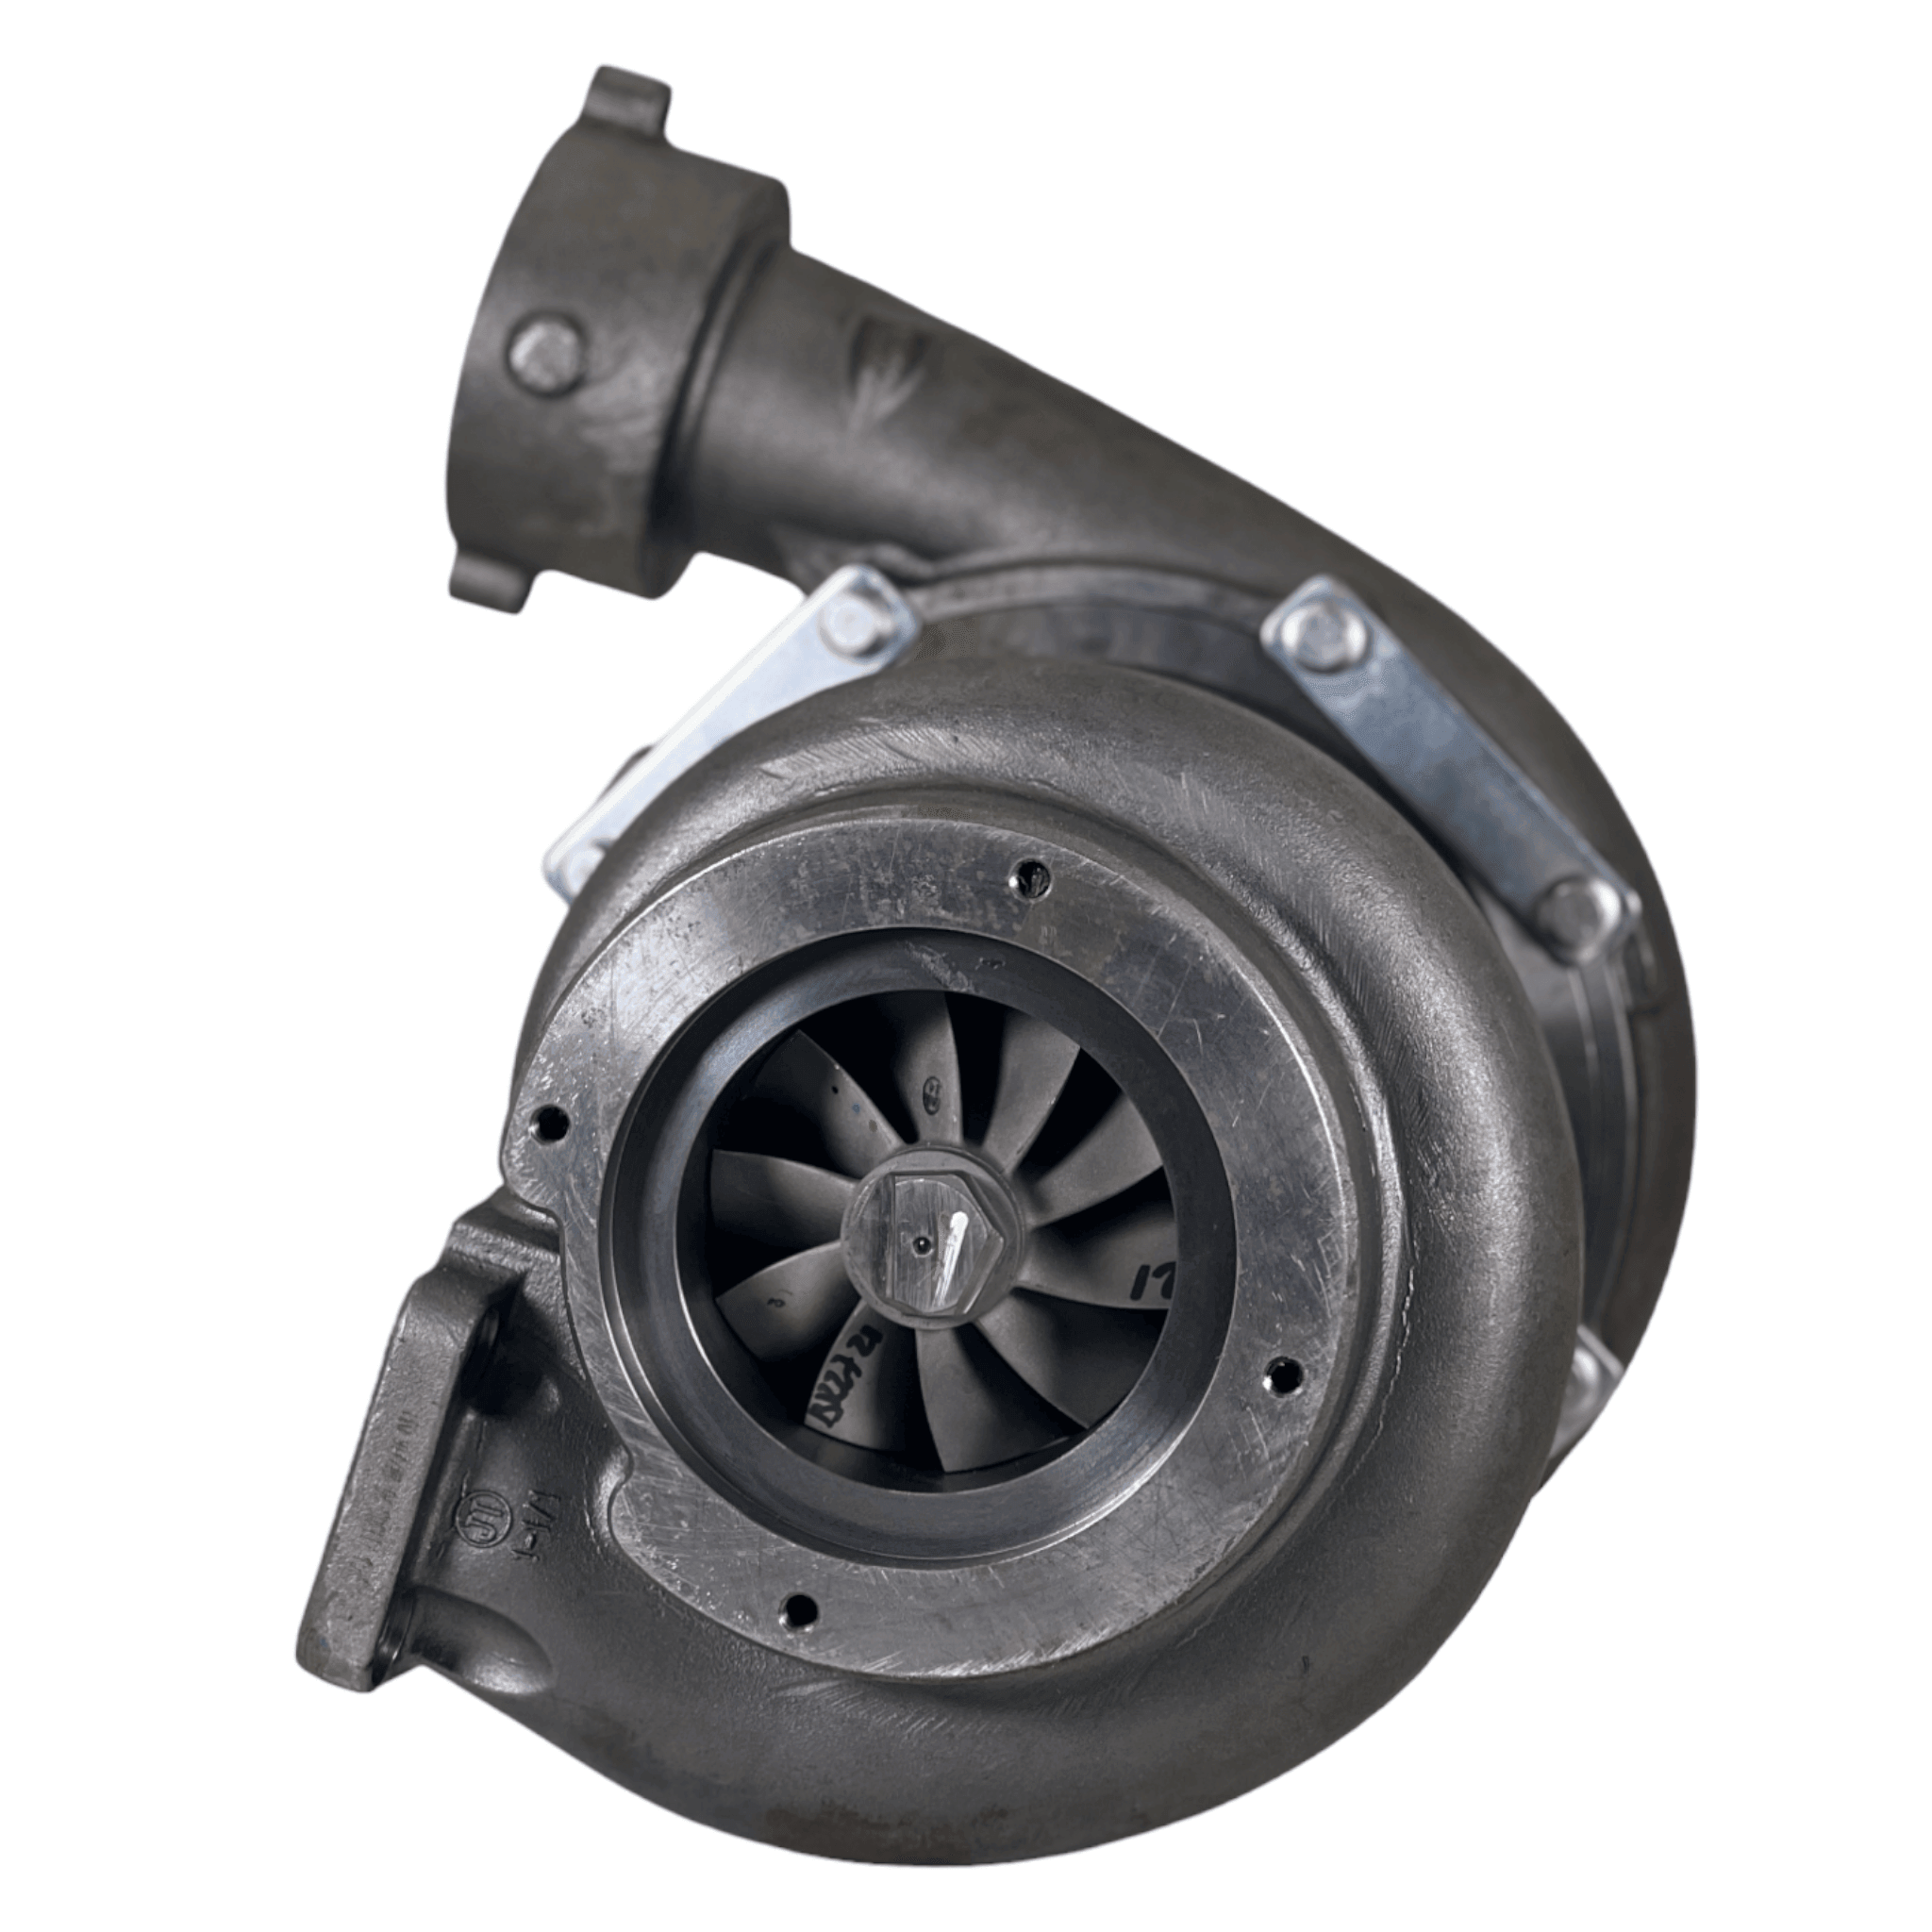 20R3987 Genuine Cat Turbocharger For Caterpillar G3508/ G3516 Engines - ADVANCED TRUCK PARTS